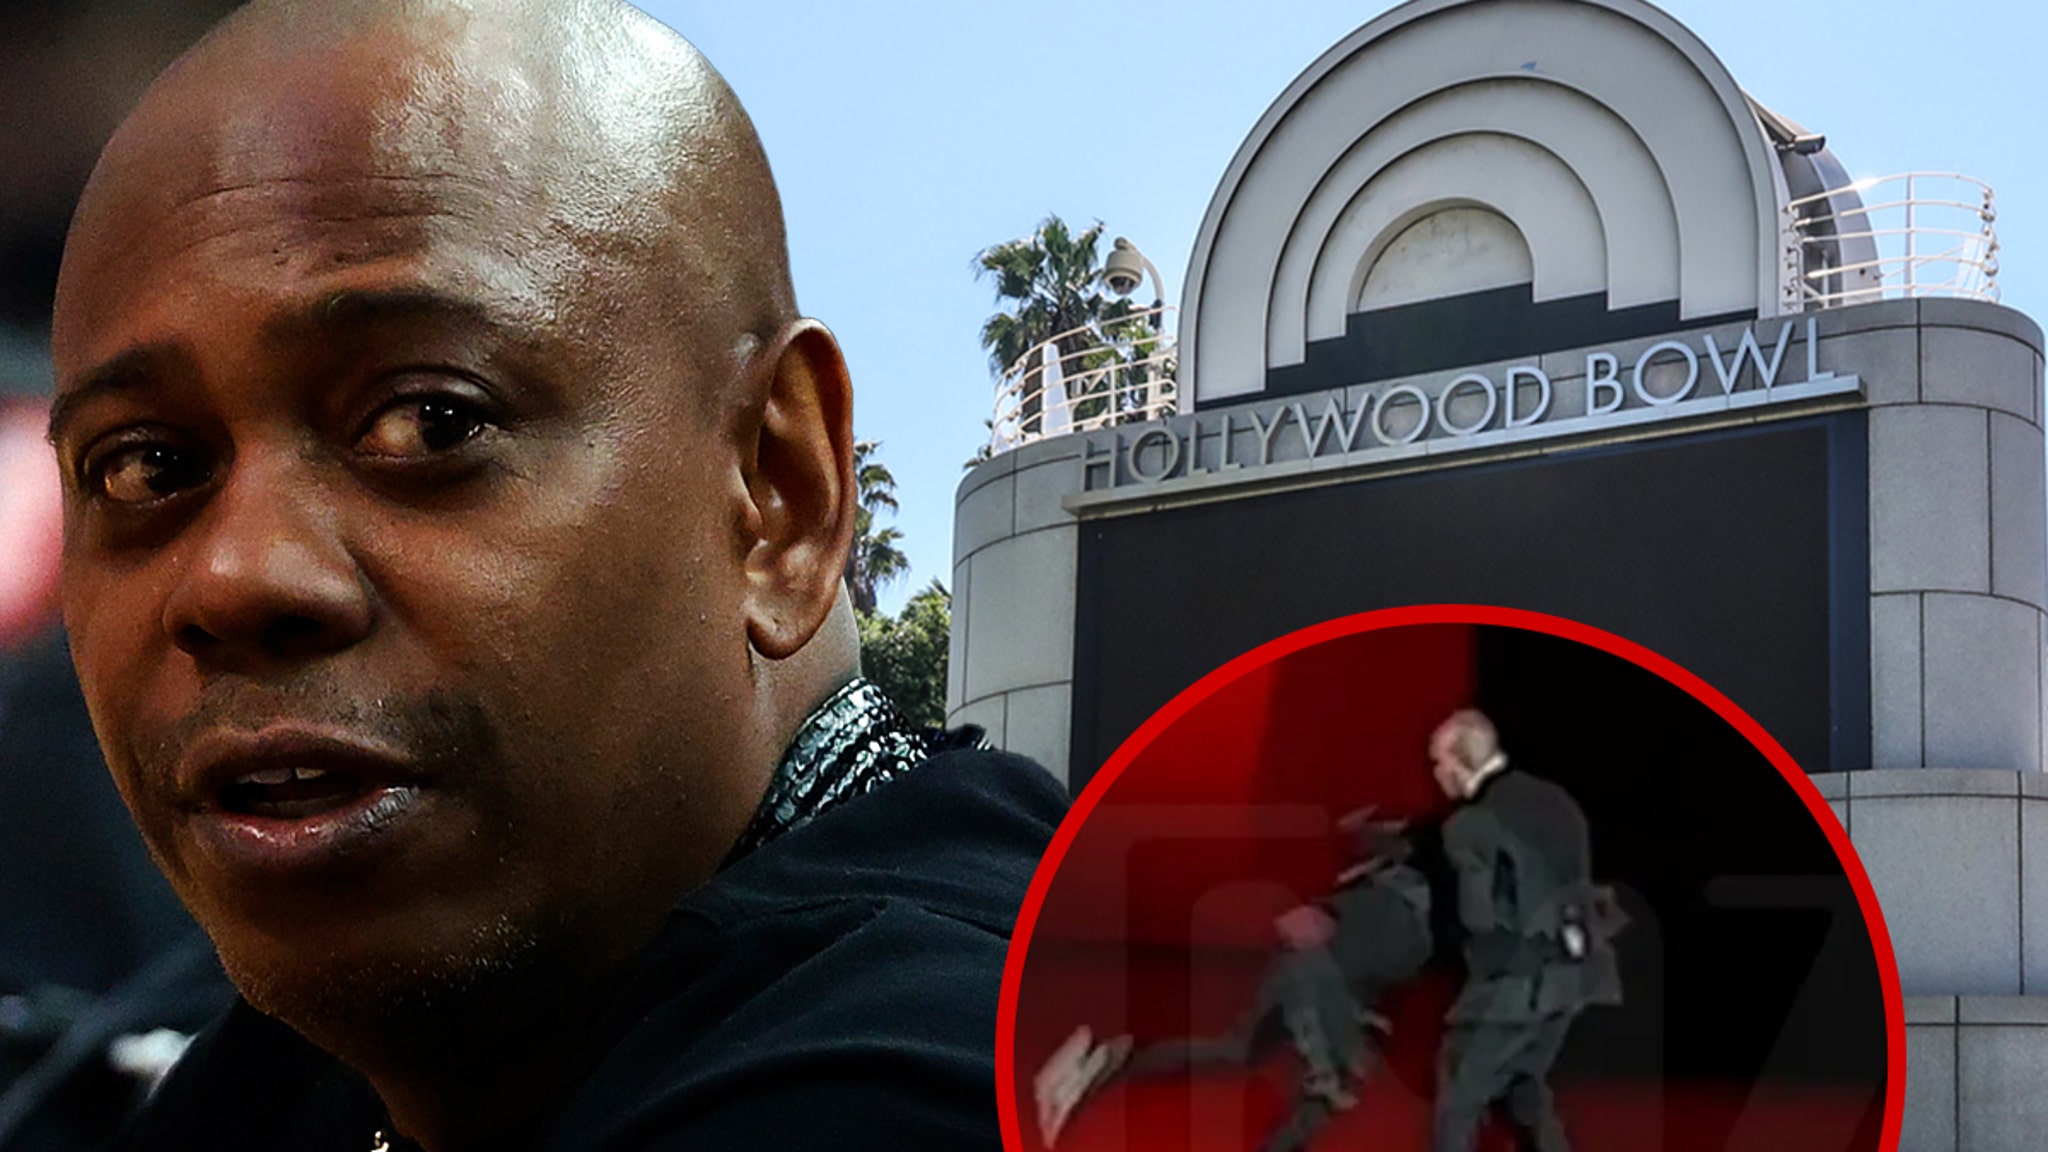 Hollywood Bowl forward Dave Chappelle sues Battery location and safety